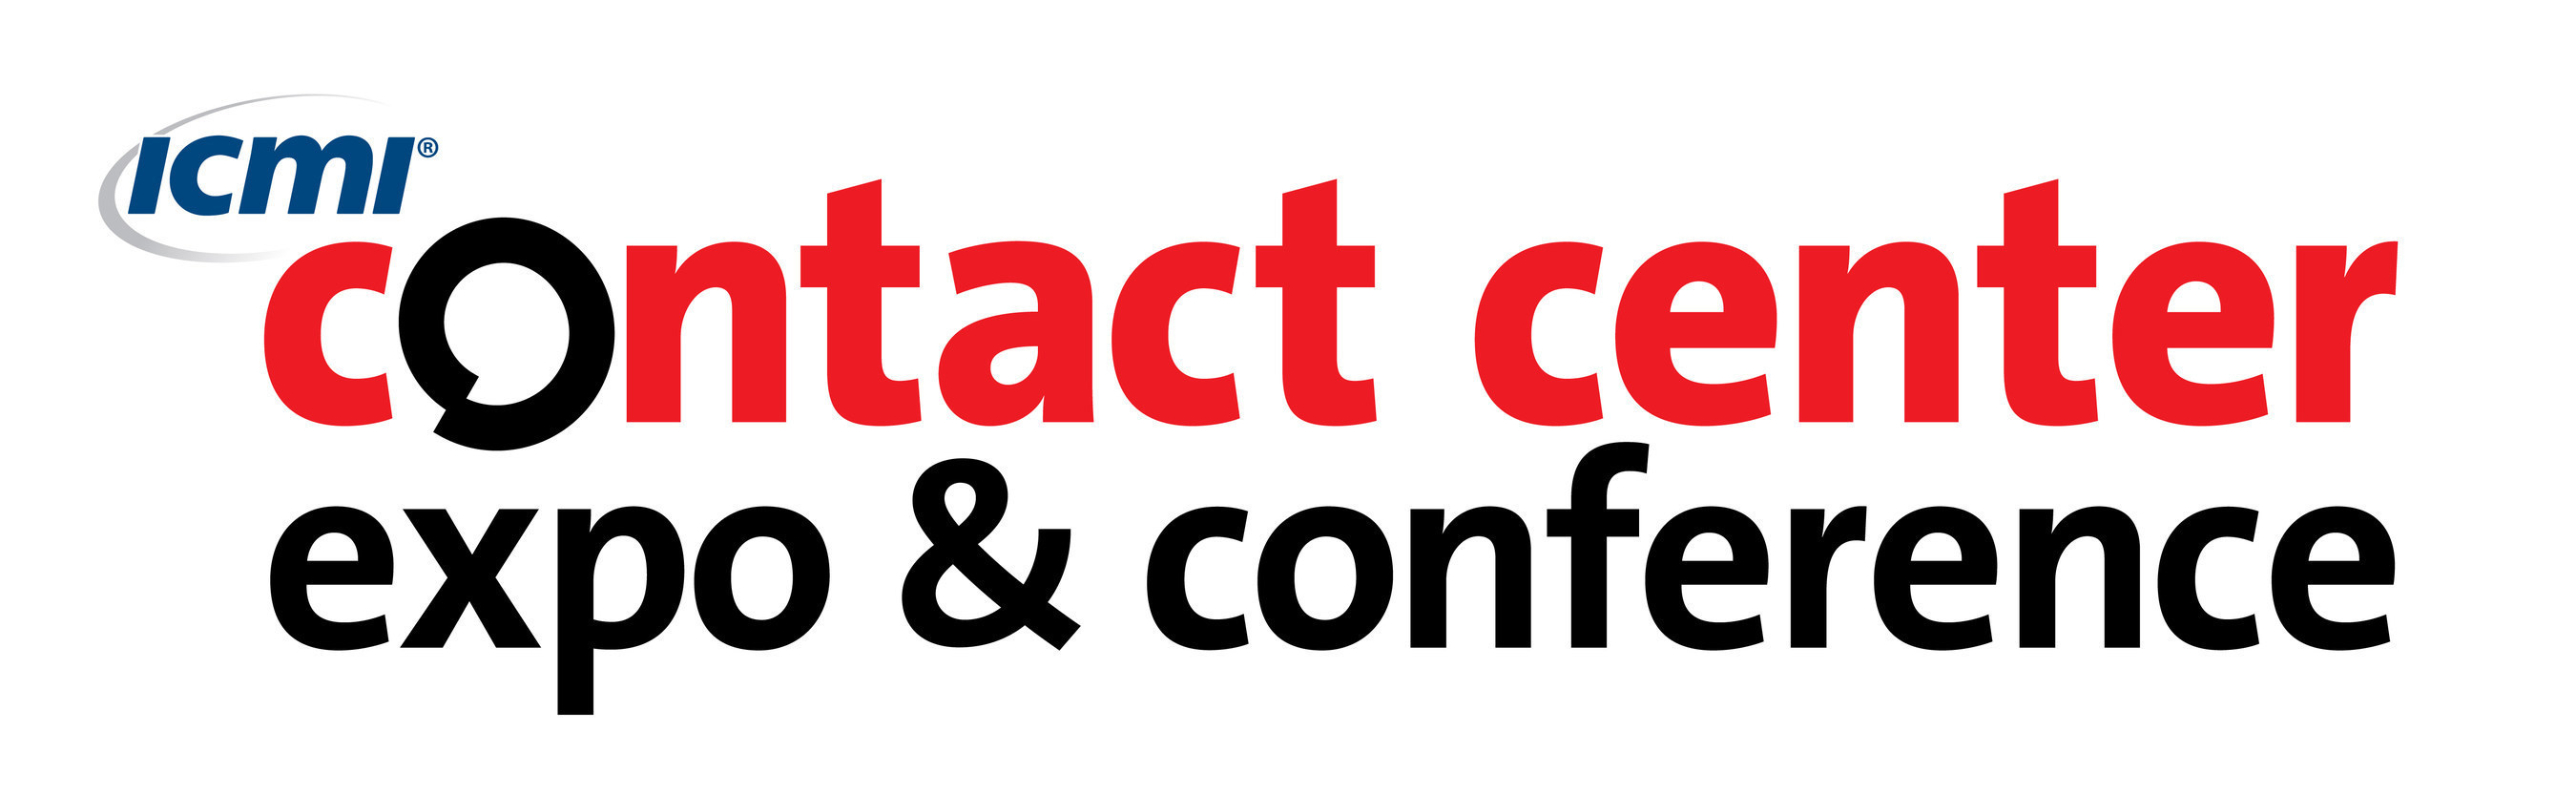 The 2015 Contact Center Expo & Conference will take place May 4-7 at the Walt Disney World Dolphin Resort in Orlando, Florida.